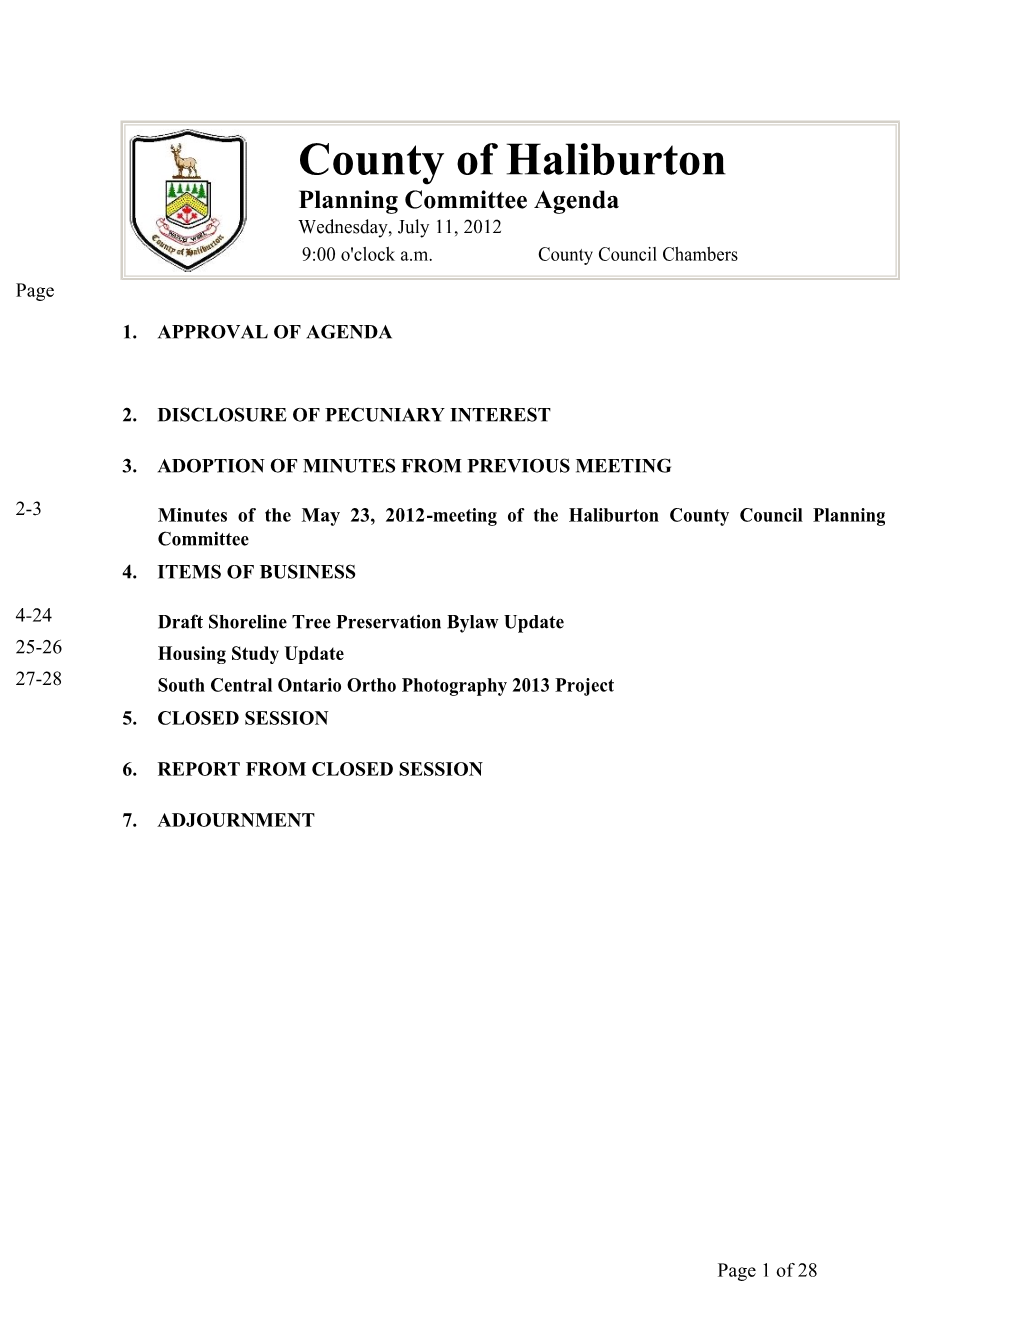 County of Haliburton Planning Committee Agenda Wednesday, July 11, 2012 9:00 O'clock A.M